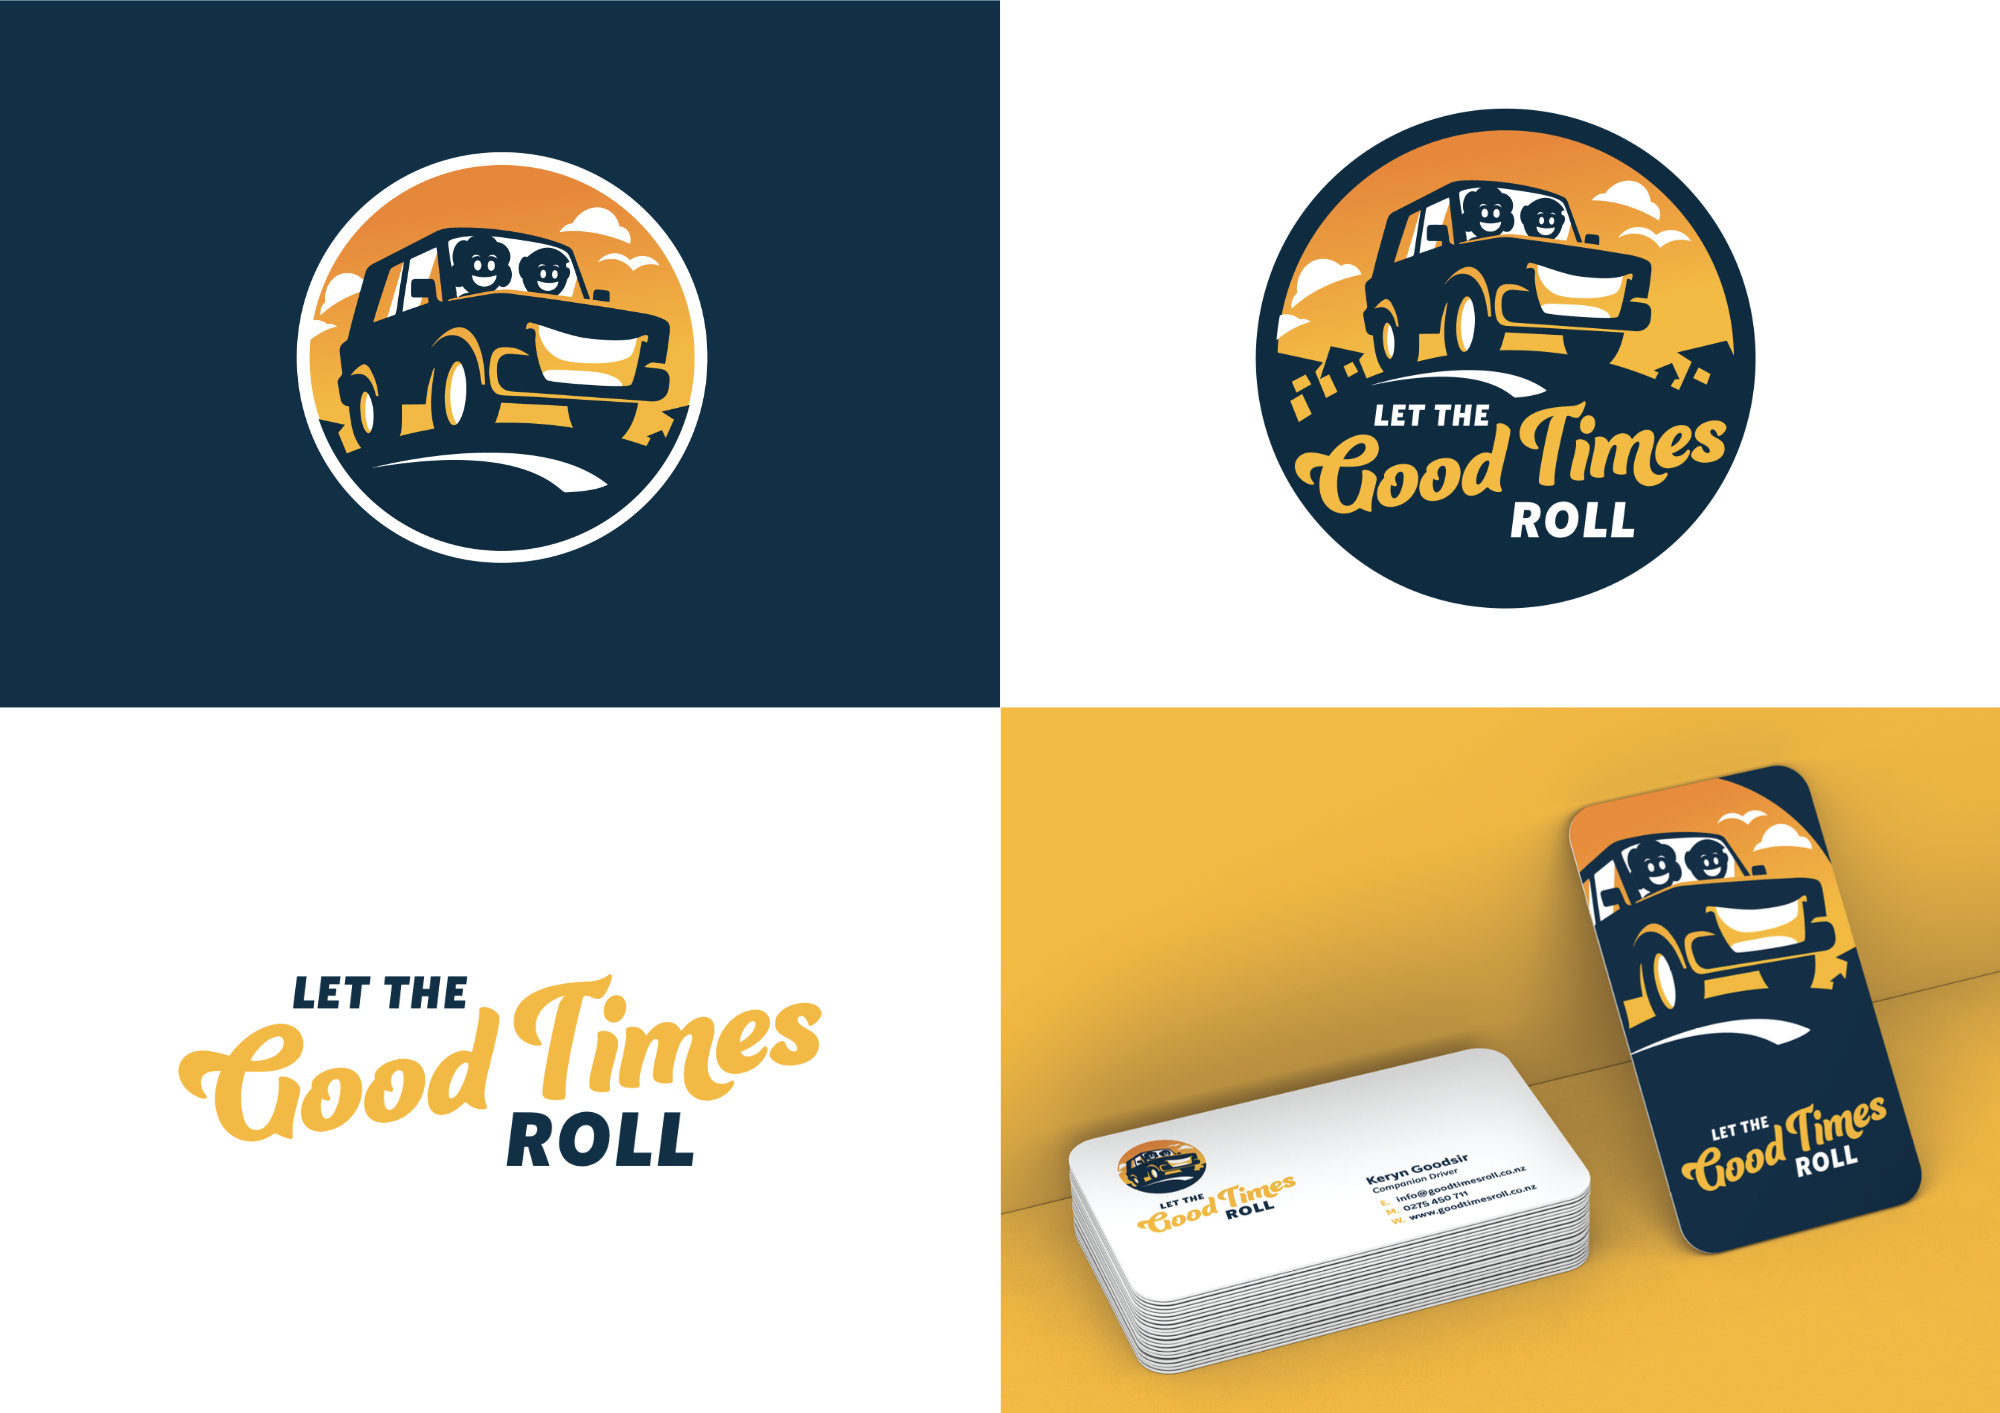 Branding for Let The Good Times Roll